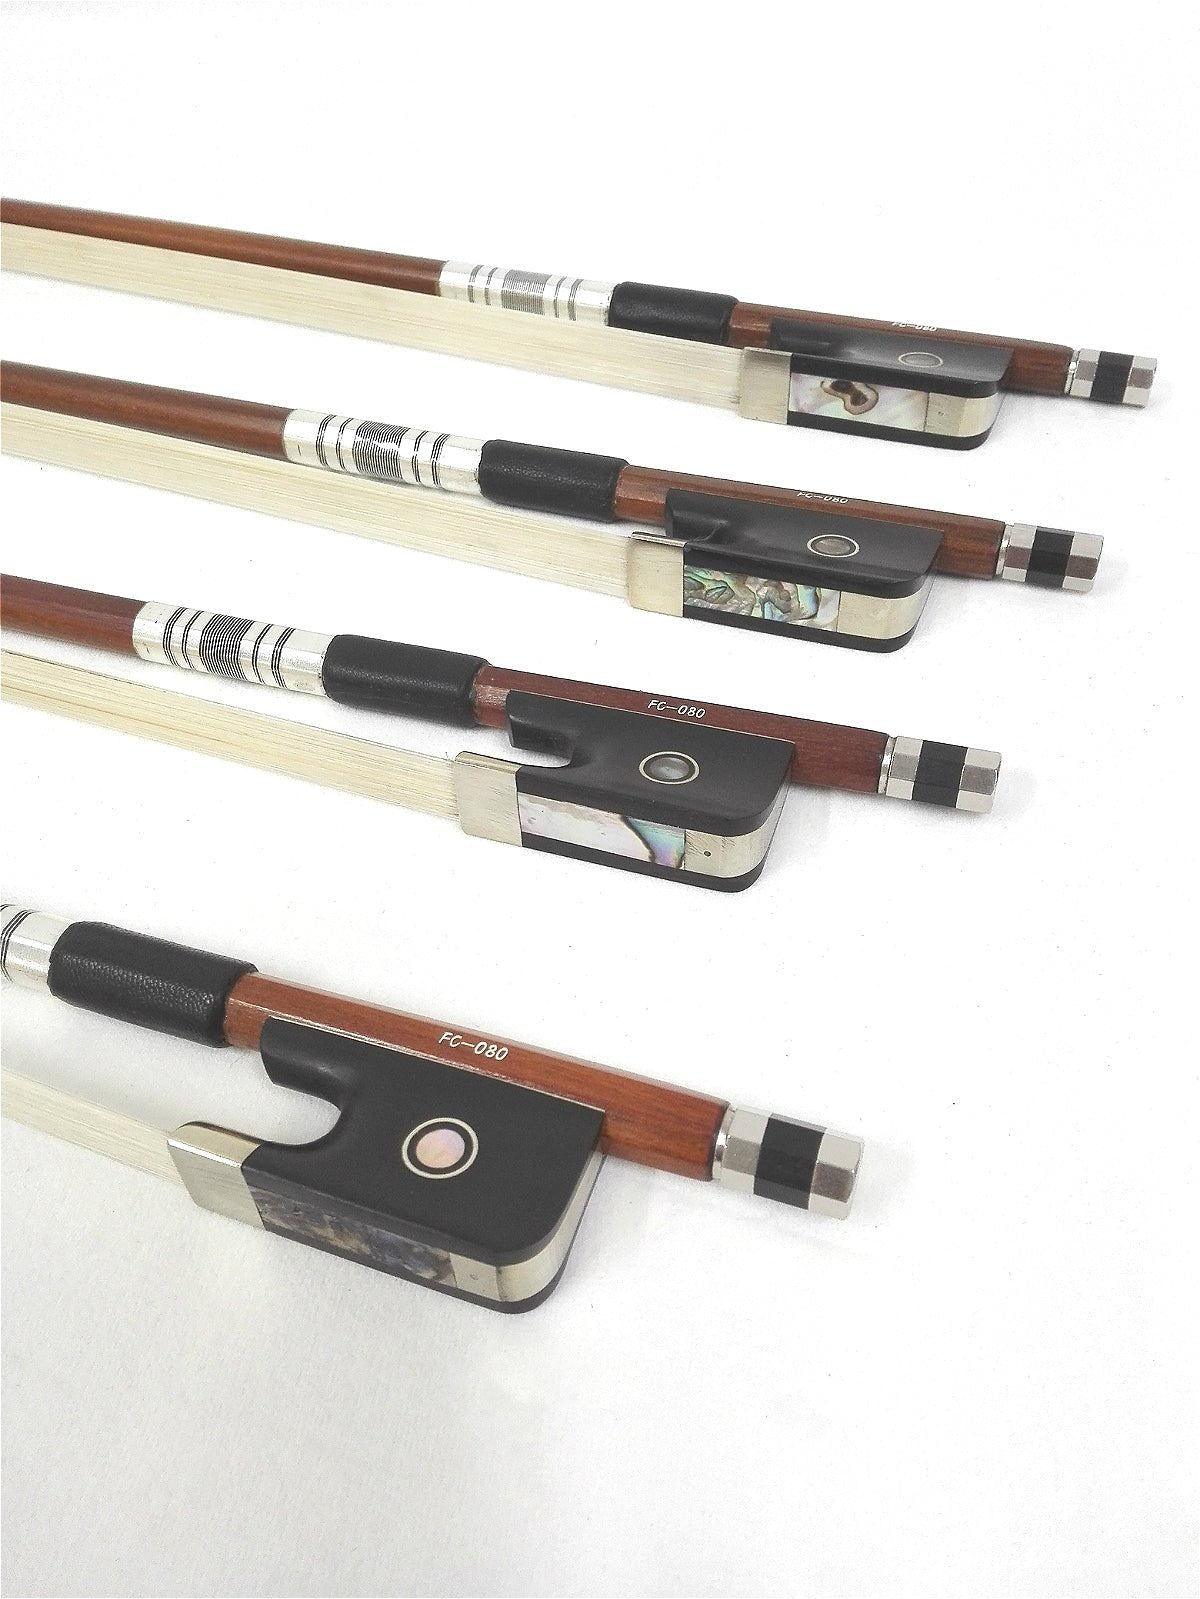 Symphony FC080 1/2 Size Cello Bow, Brazil-wood, Round Stick, Real Horse Hair